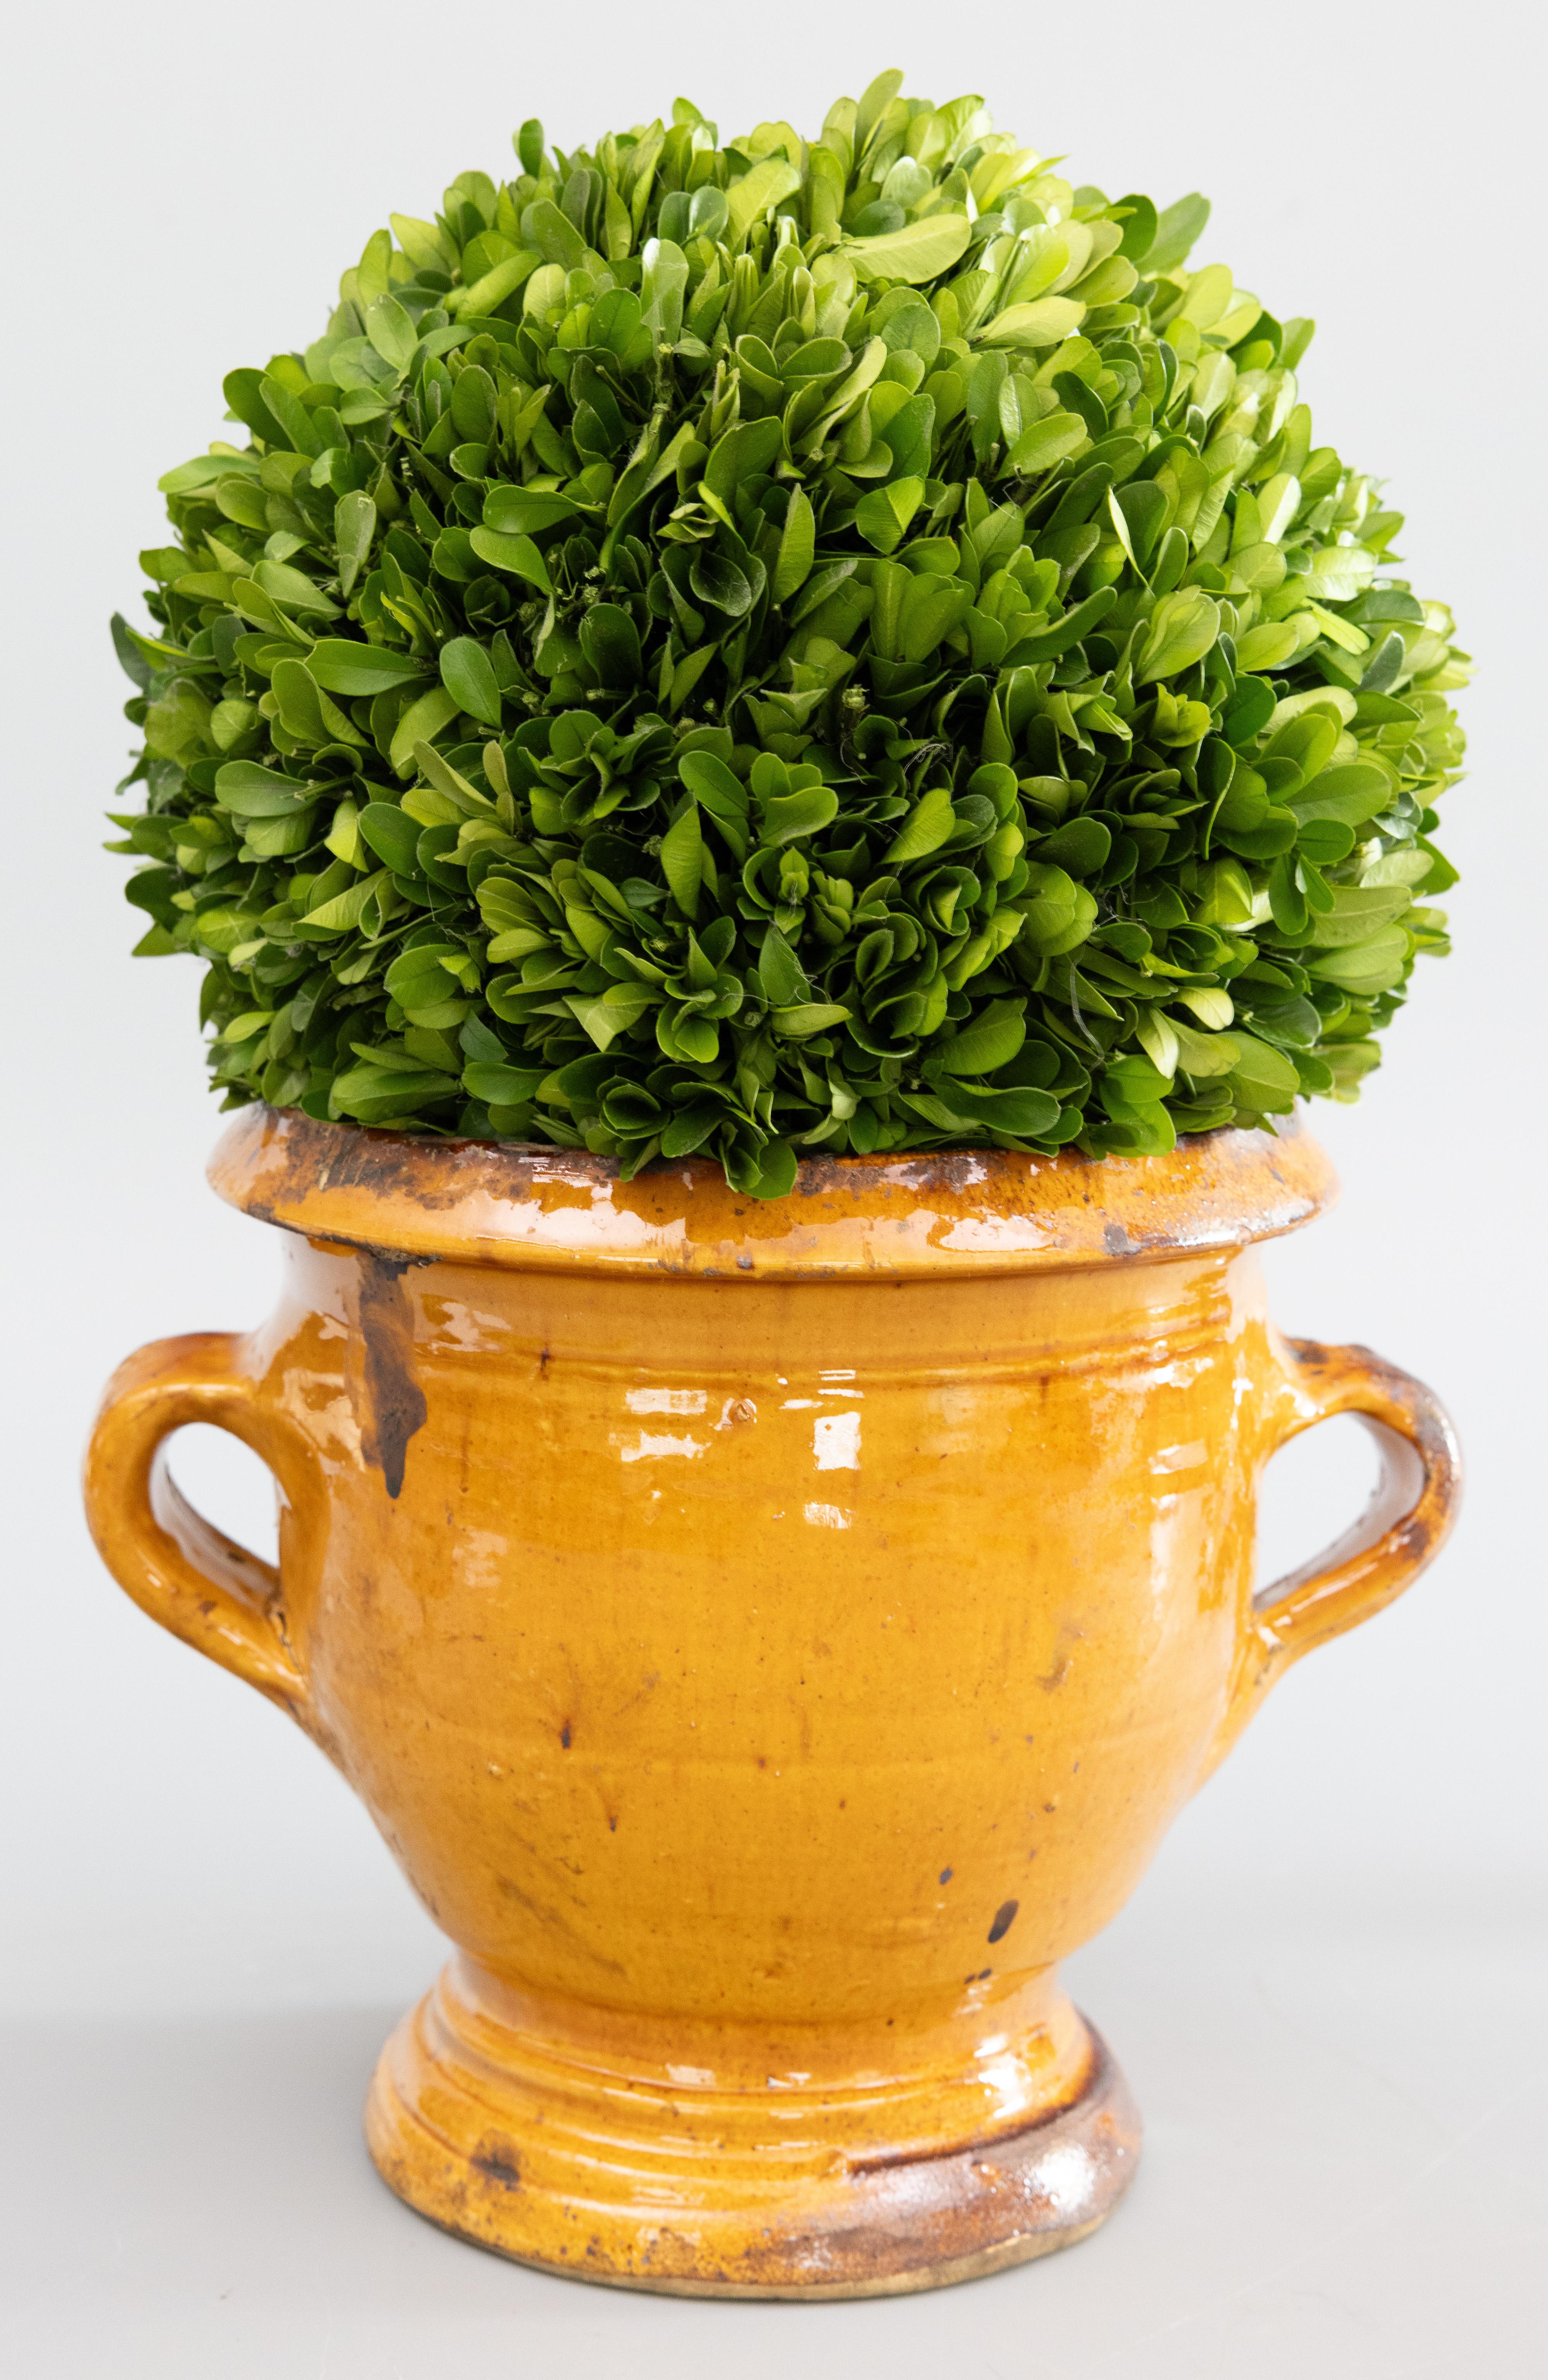 A lovely antique 19th-Century ocher yellow glazed terracotta pottery Provençal planter / jardiniere / urn from Provence in southeastern France. There is a drainage hole on the base. This charming planter is hand thrown with handles known as 'ears'